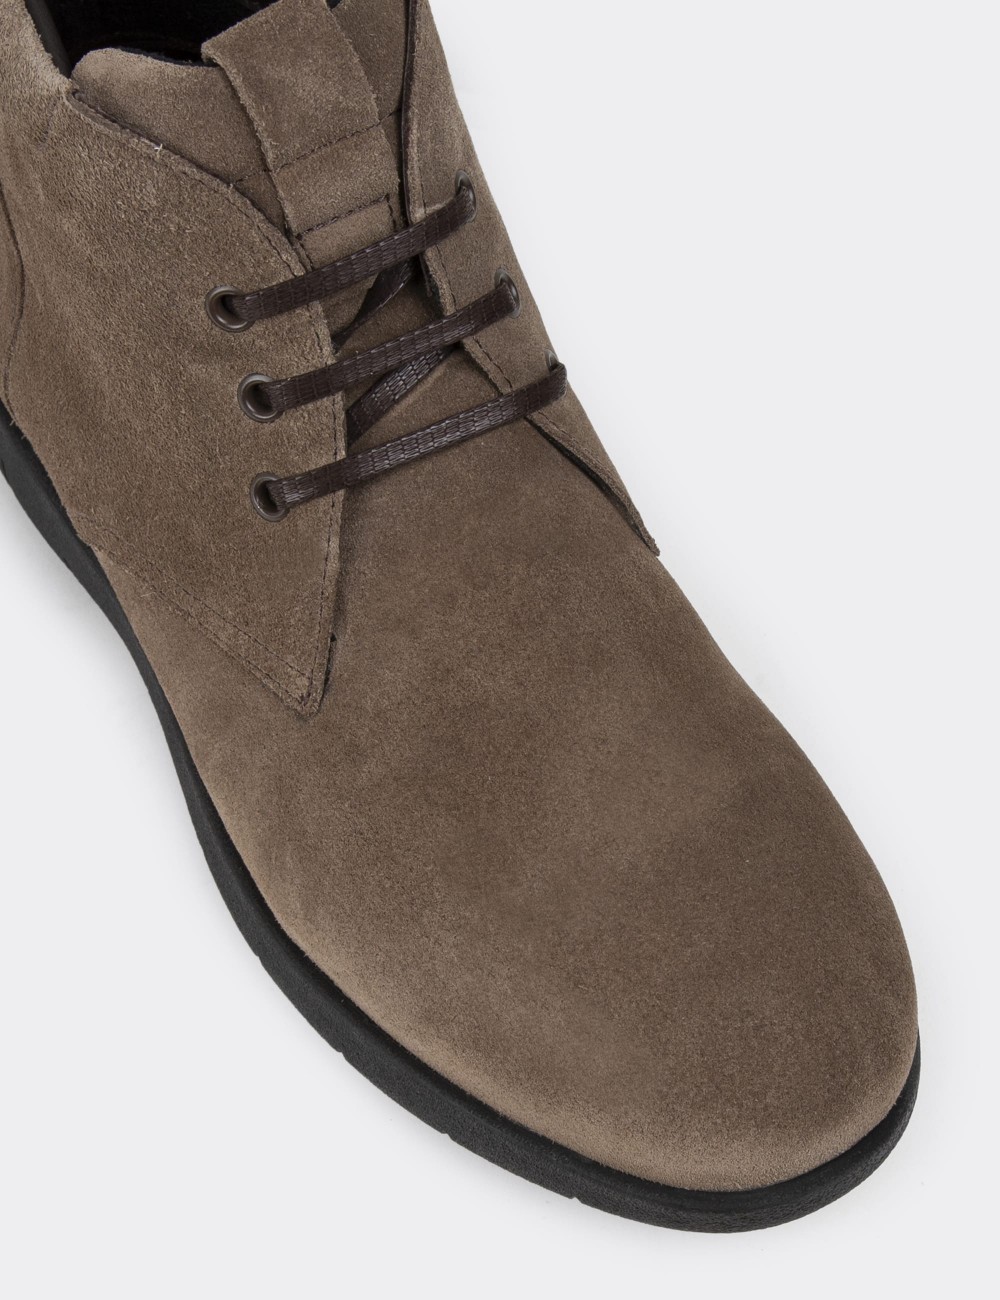 Sandstone Suede Leather Boots - 01948MVZNC01